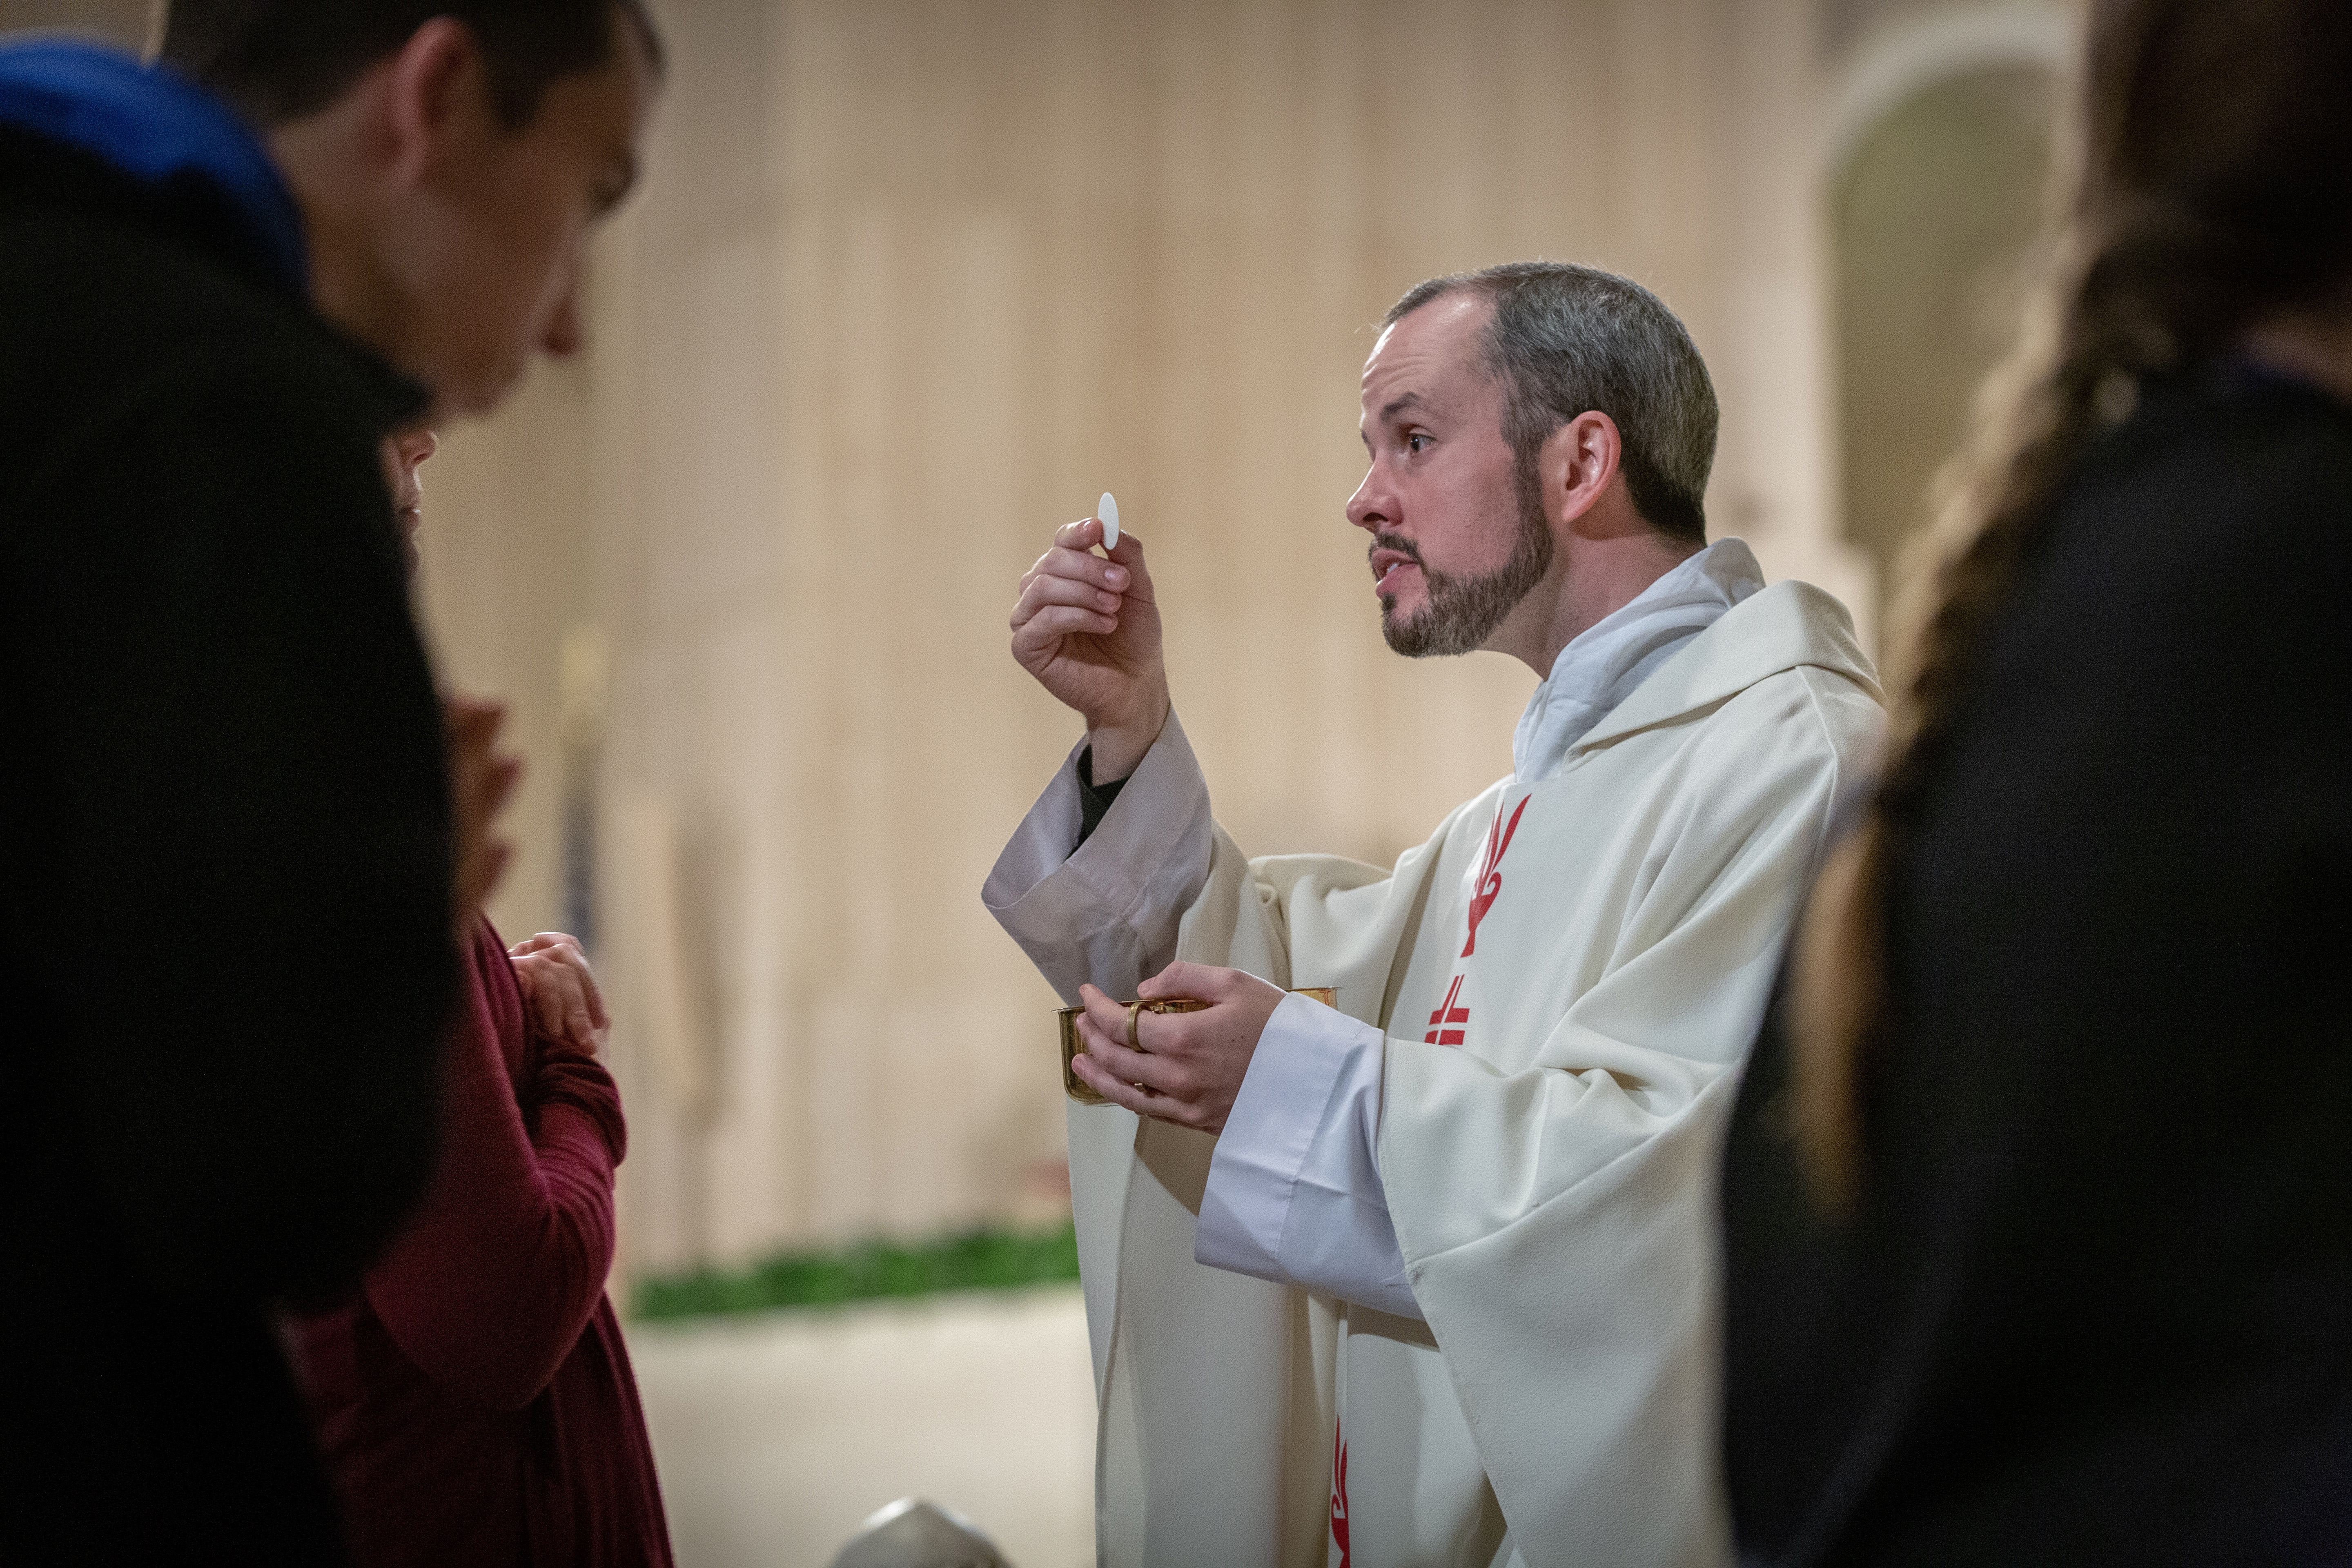 Father Conor Sullivan distributed the Eucharist during Mass celebrated by Archbishop Robert J. Carlson for youth attending the Generation Life pilgrimage on Jan. 19, 2019.